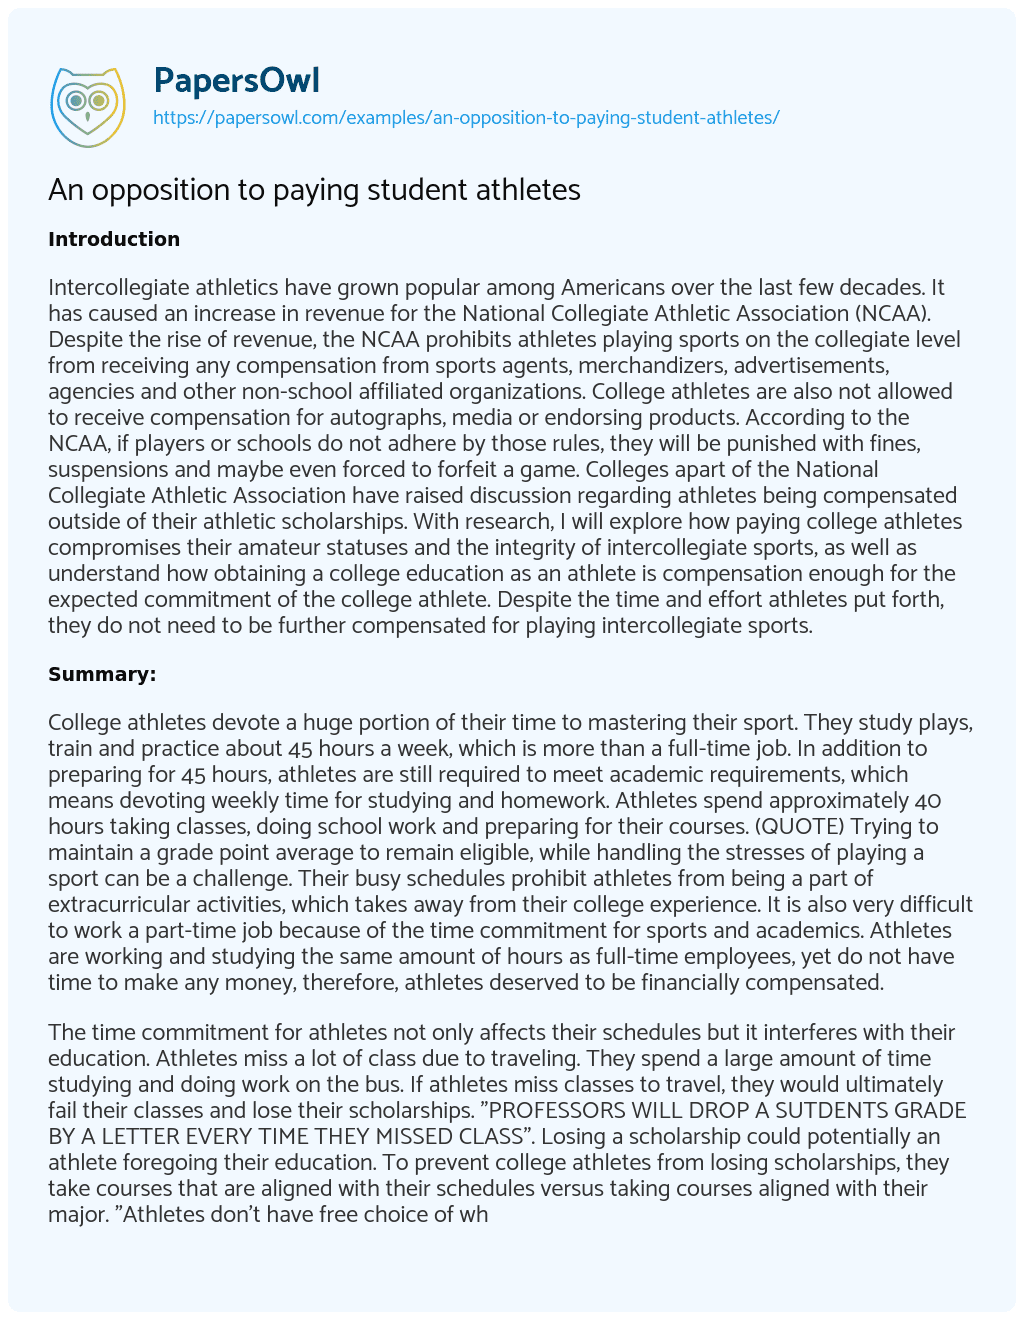 Essay on An Opposition to Paying Student Athletes